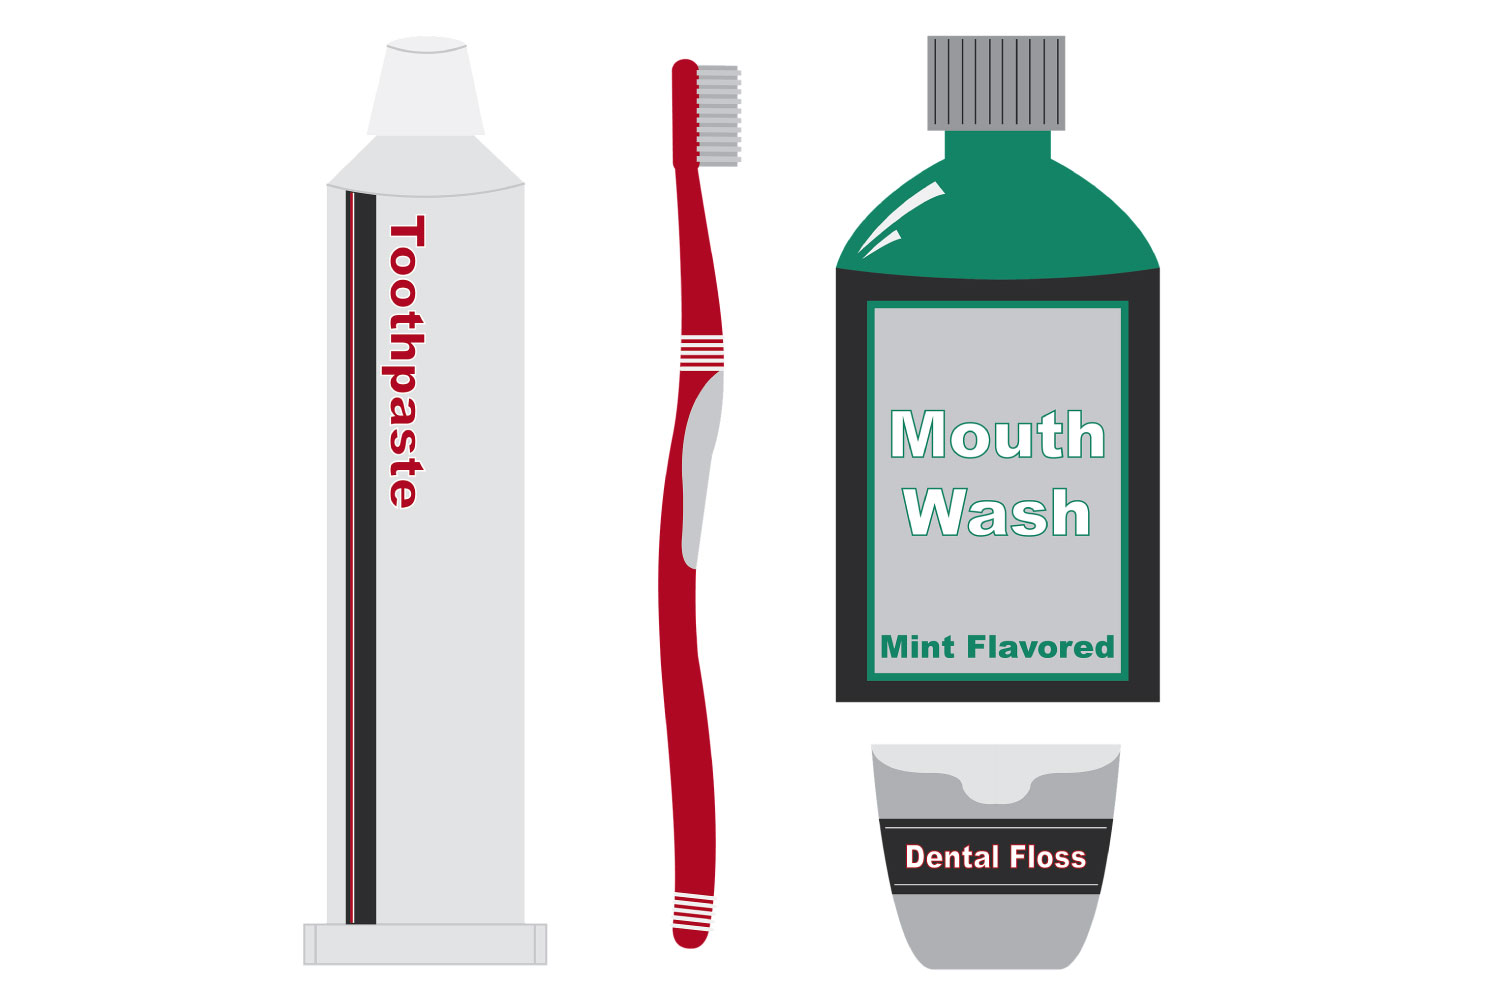 Oral care products including toothpaste, toothbrush, floss & mouthwash.